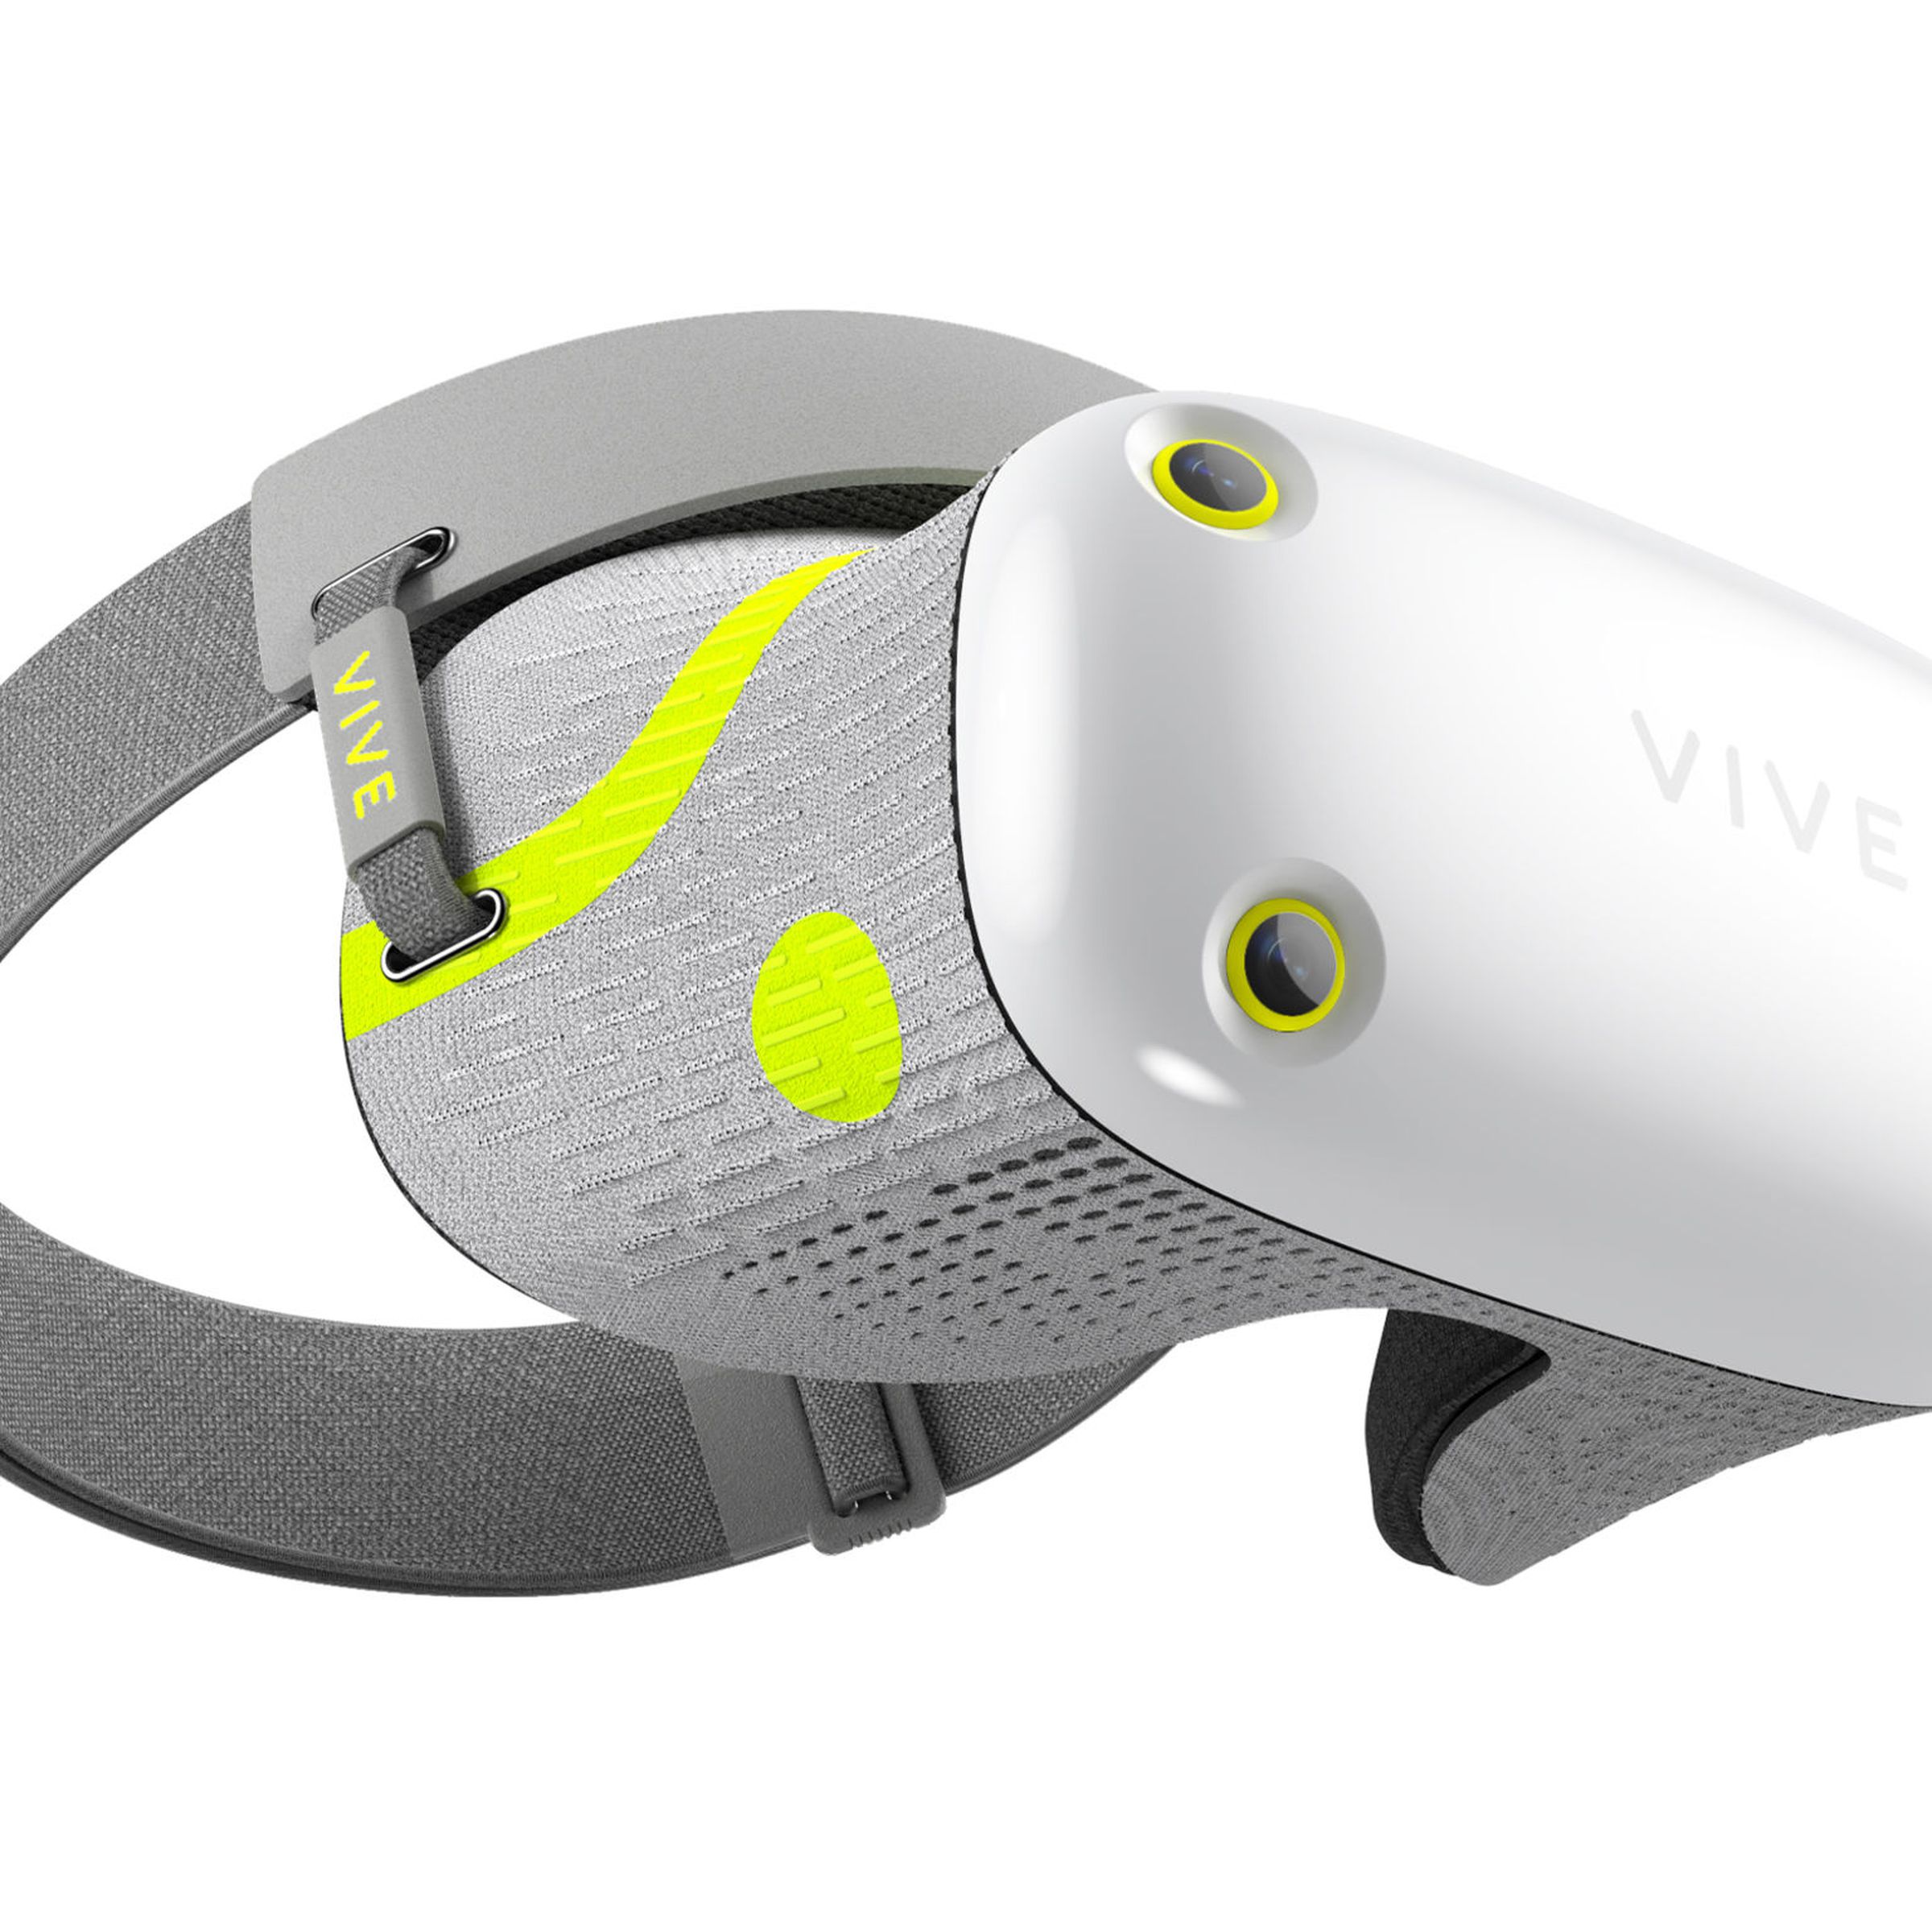 Leaked images appeared to show a new fitness-focused VR headset from HTC. 